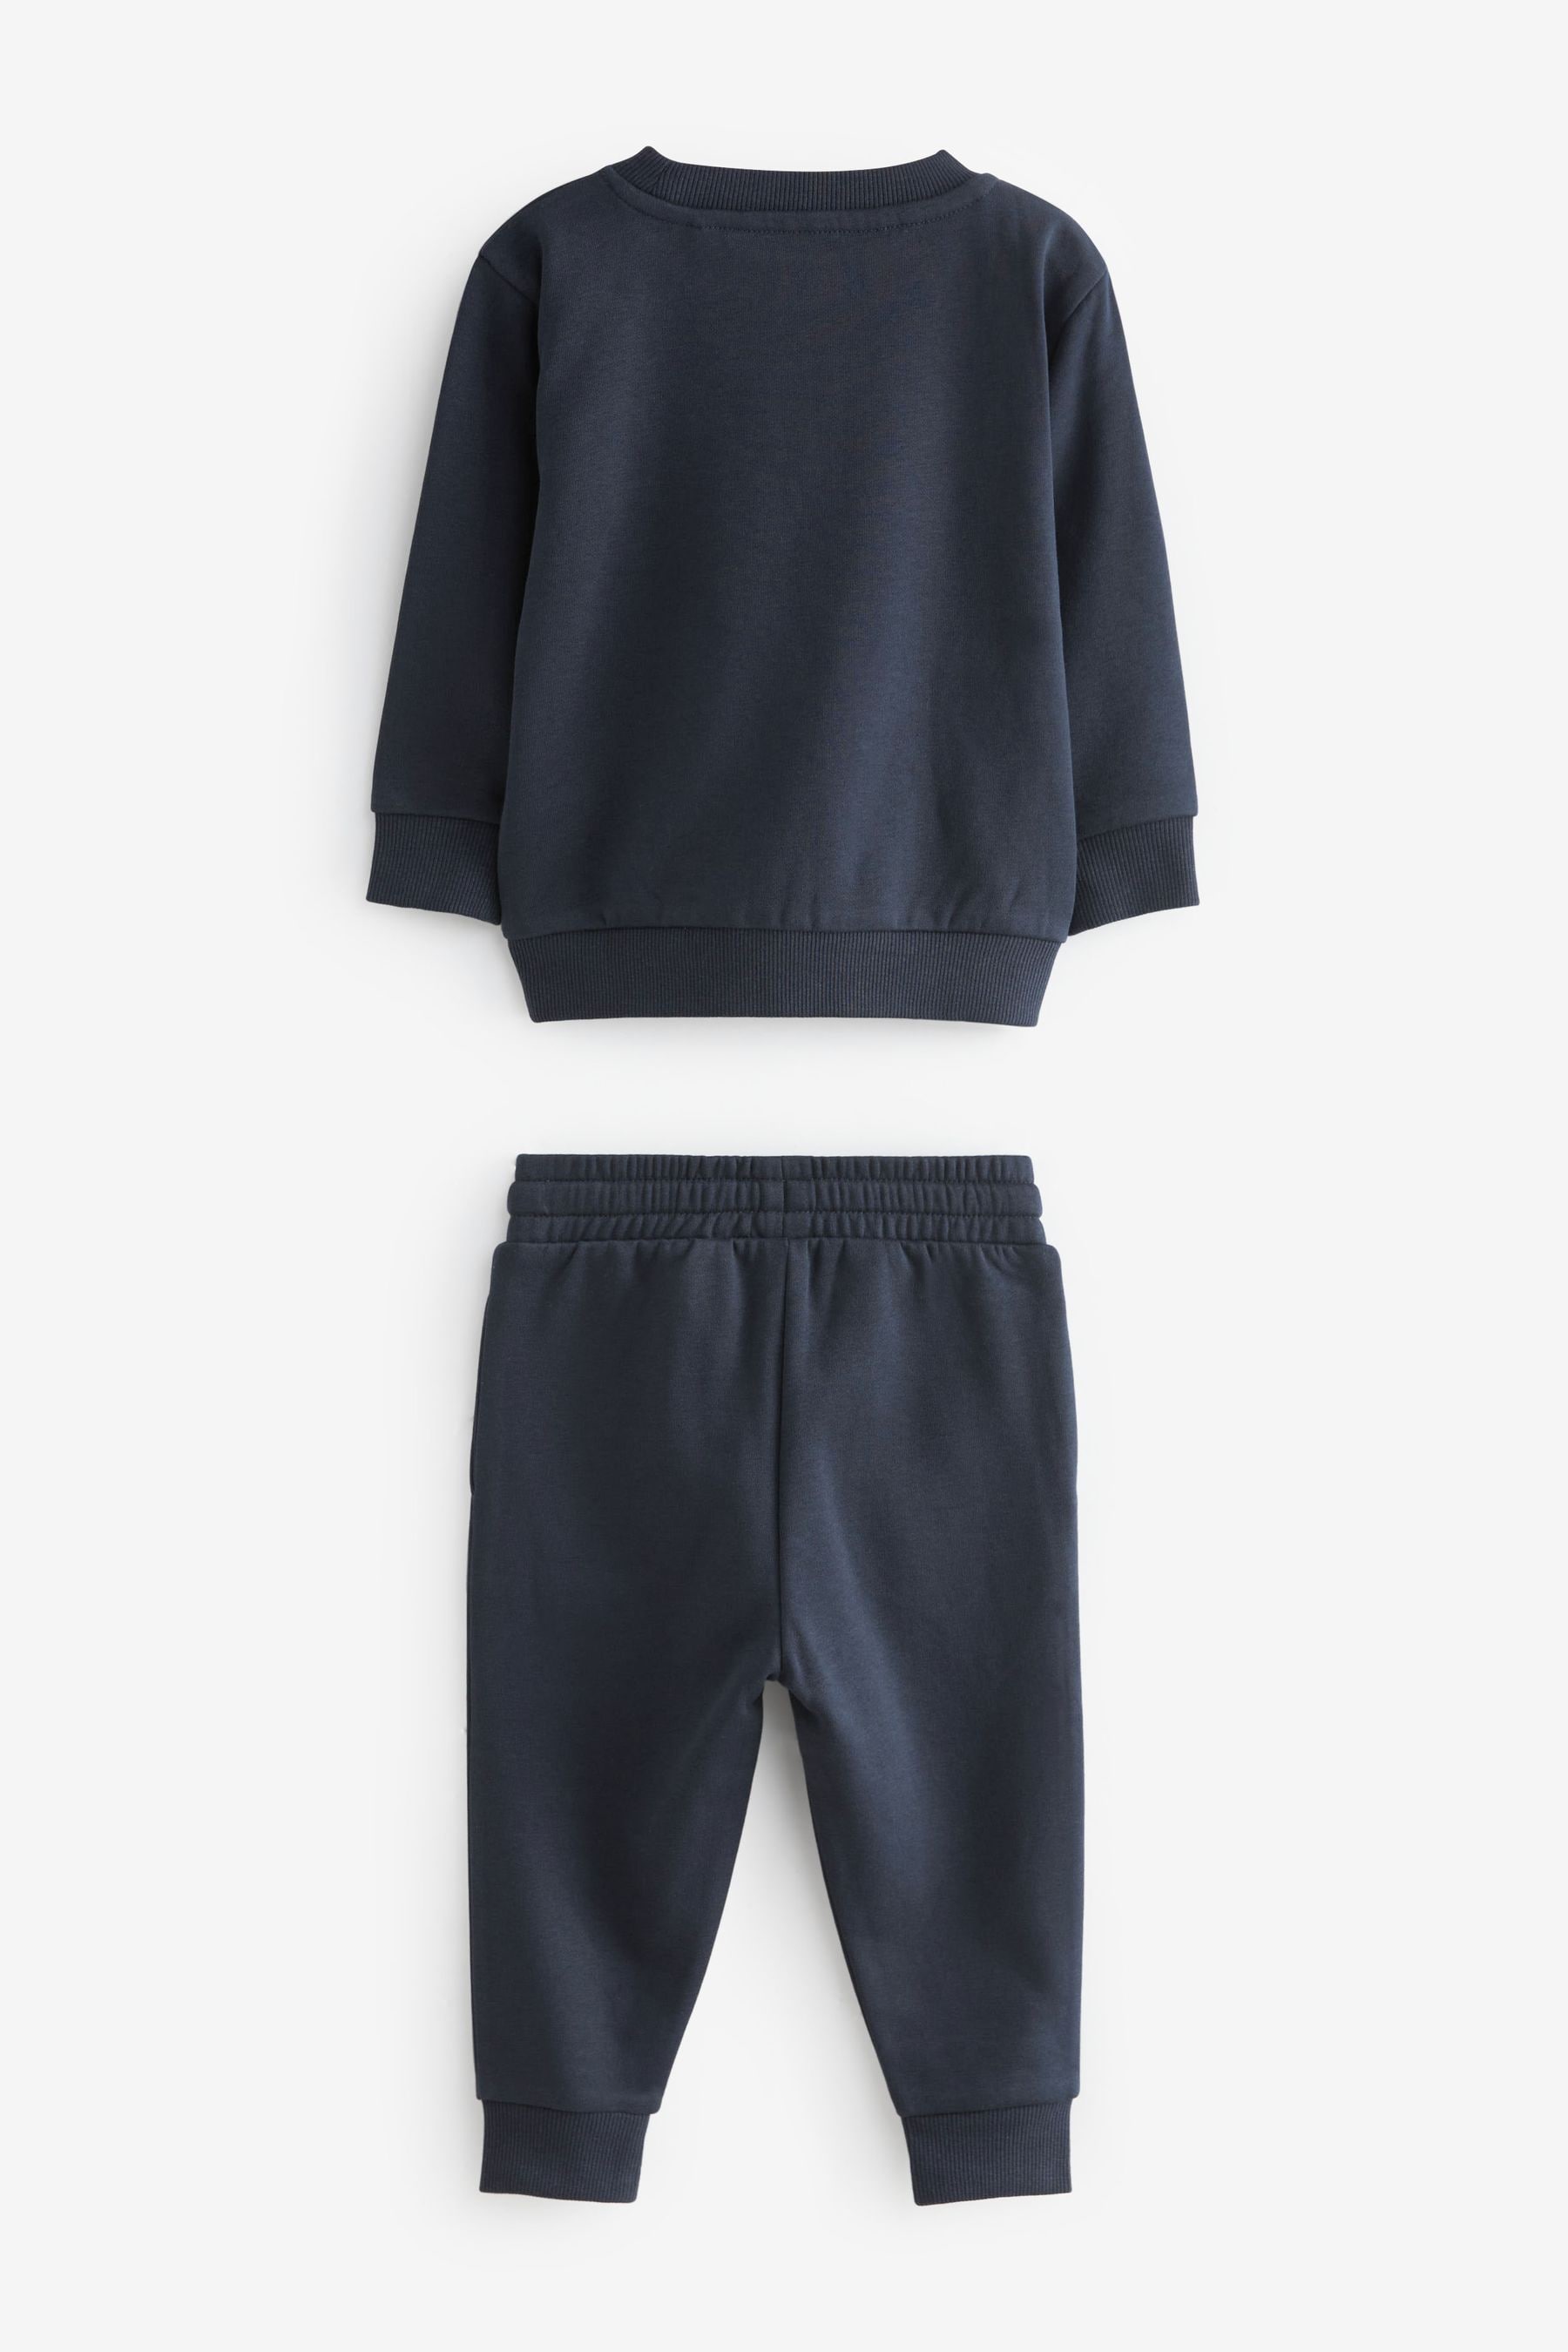 Buy Blue Navy Jersey Sweatshirt And Joggers Set (3mths-7yrs) from the ...